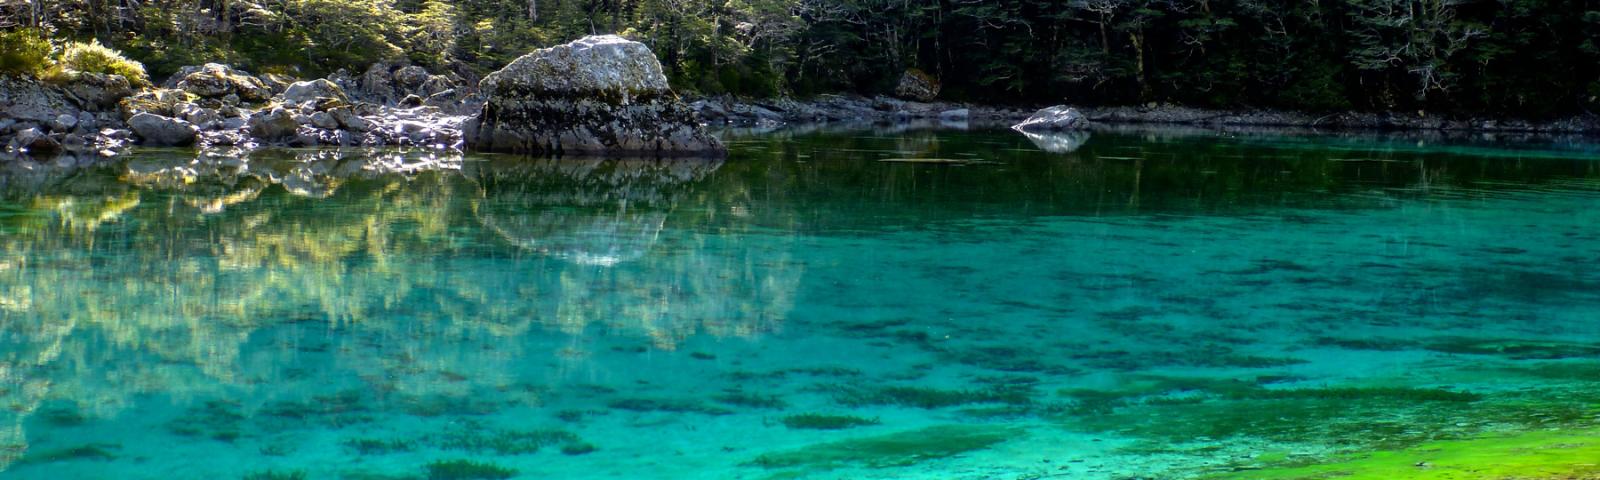 Nelsons Blue Lake has the clearest water in the world